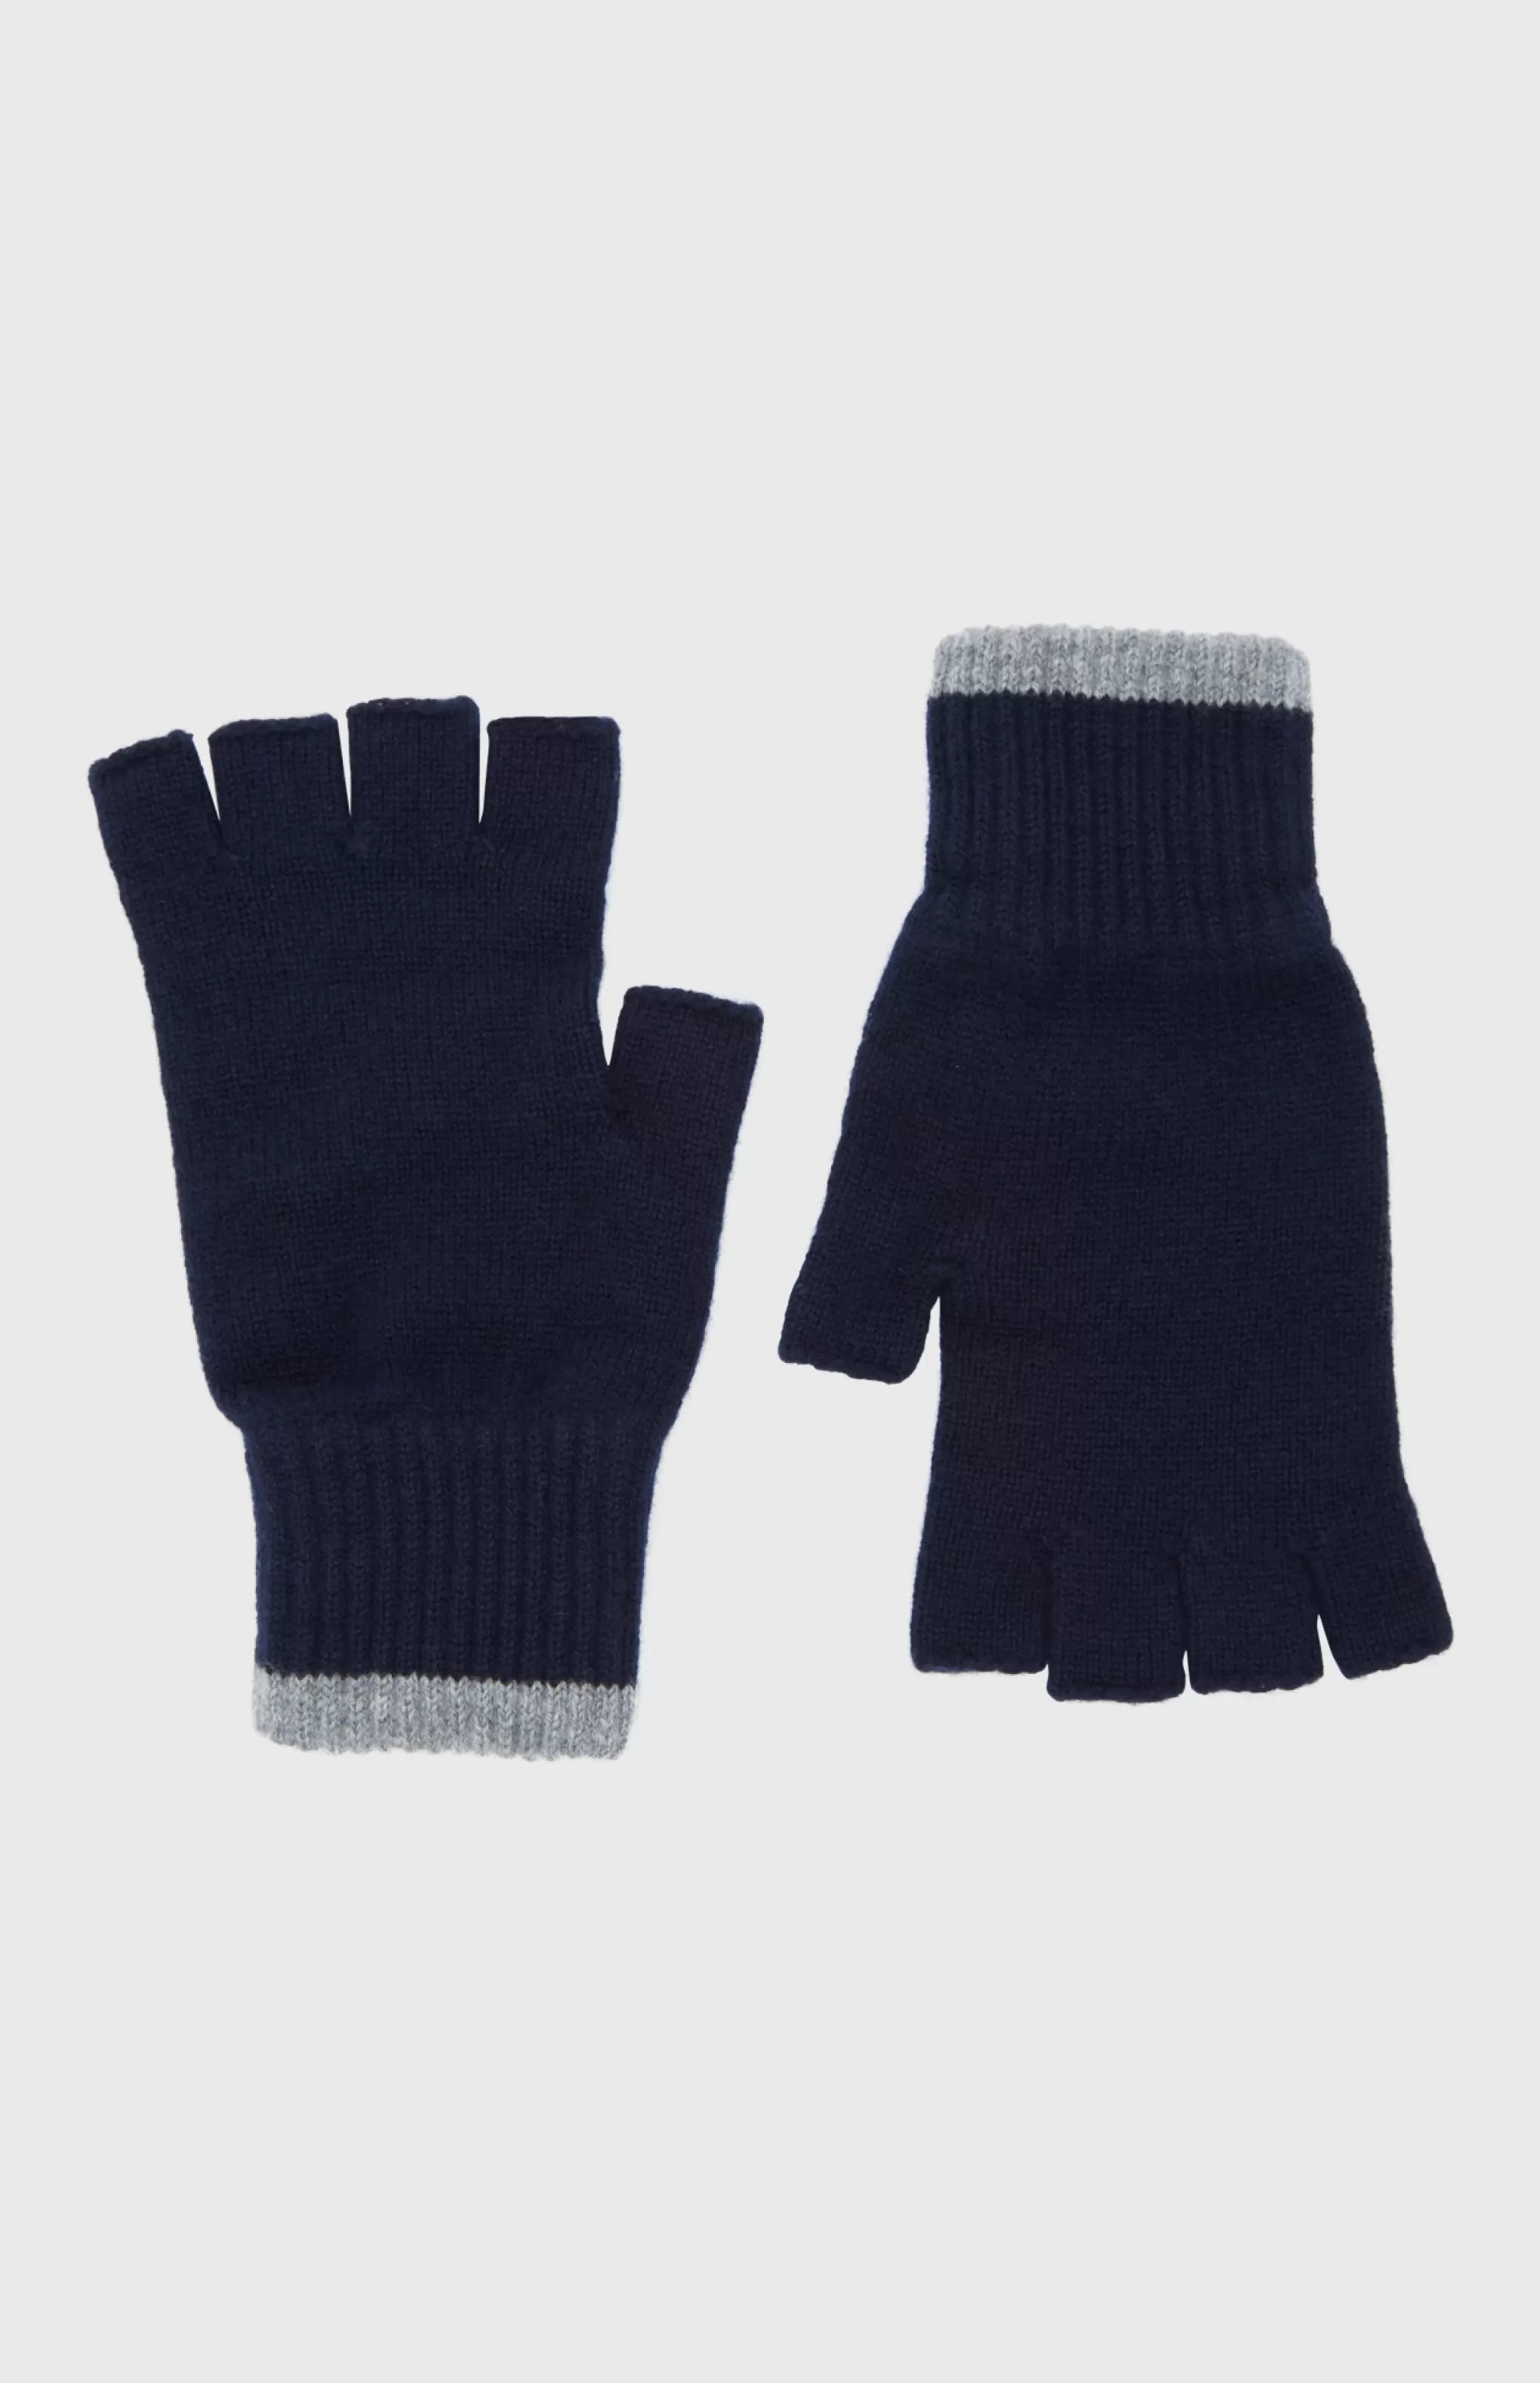 Best Cashmere Fingerless Gloves Contrast Ribs In Ink And Flannel Grey Men Gloves